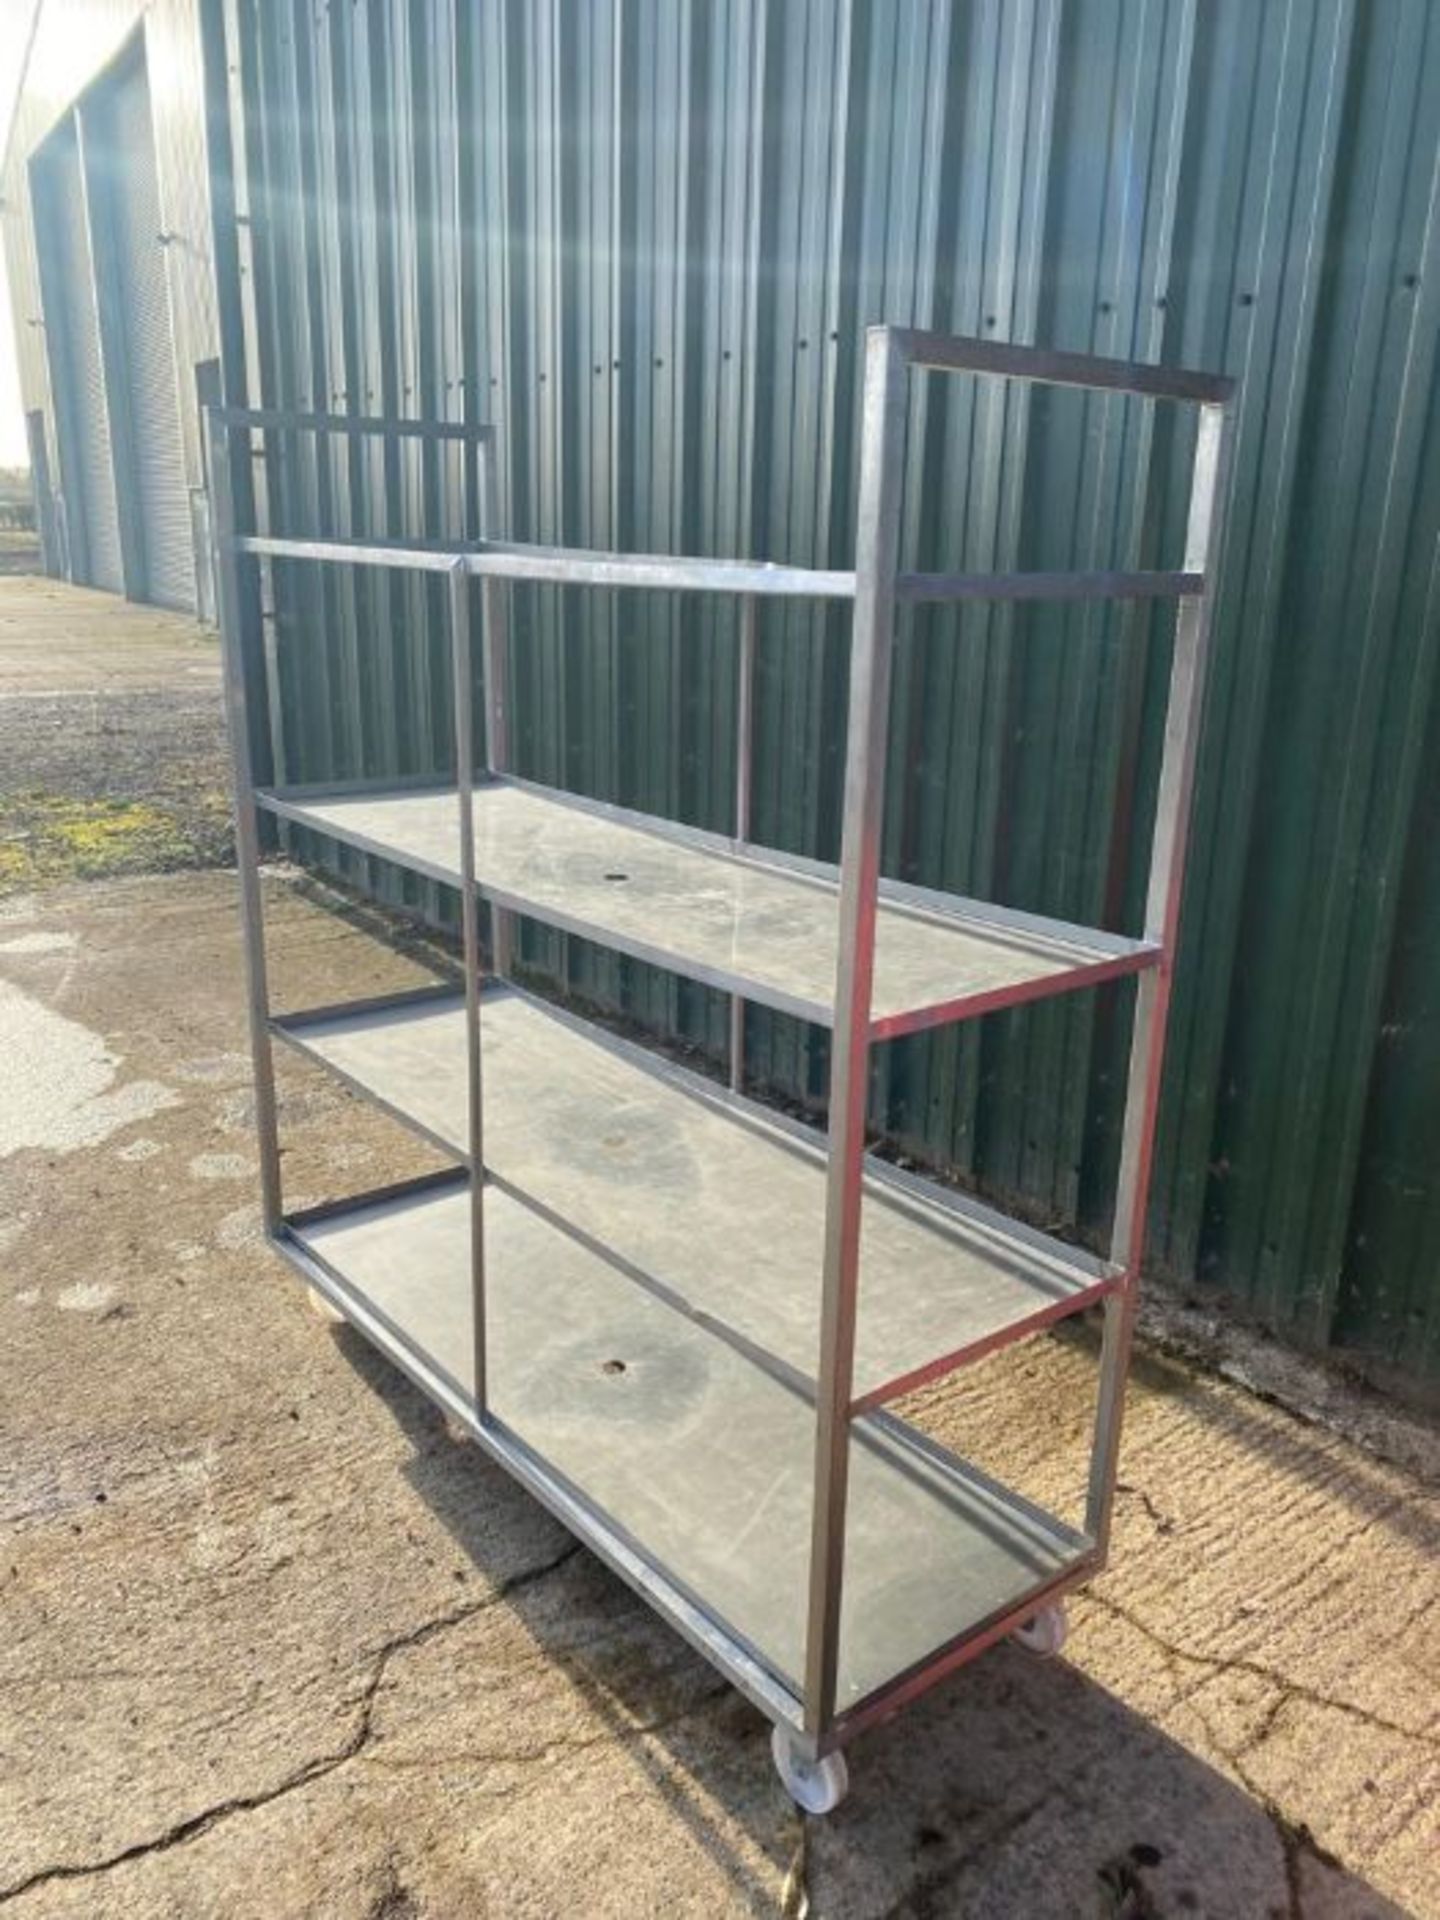 MOBILE STAINLESS STEEL TROLLEY - Image 2 of 2